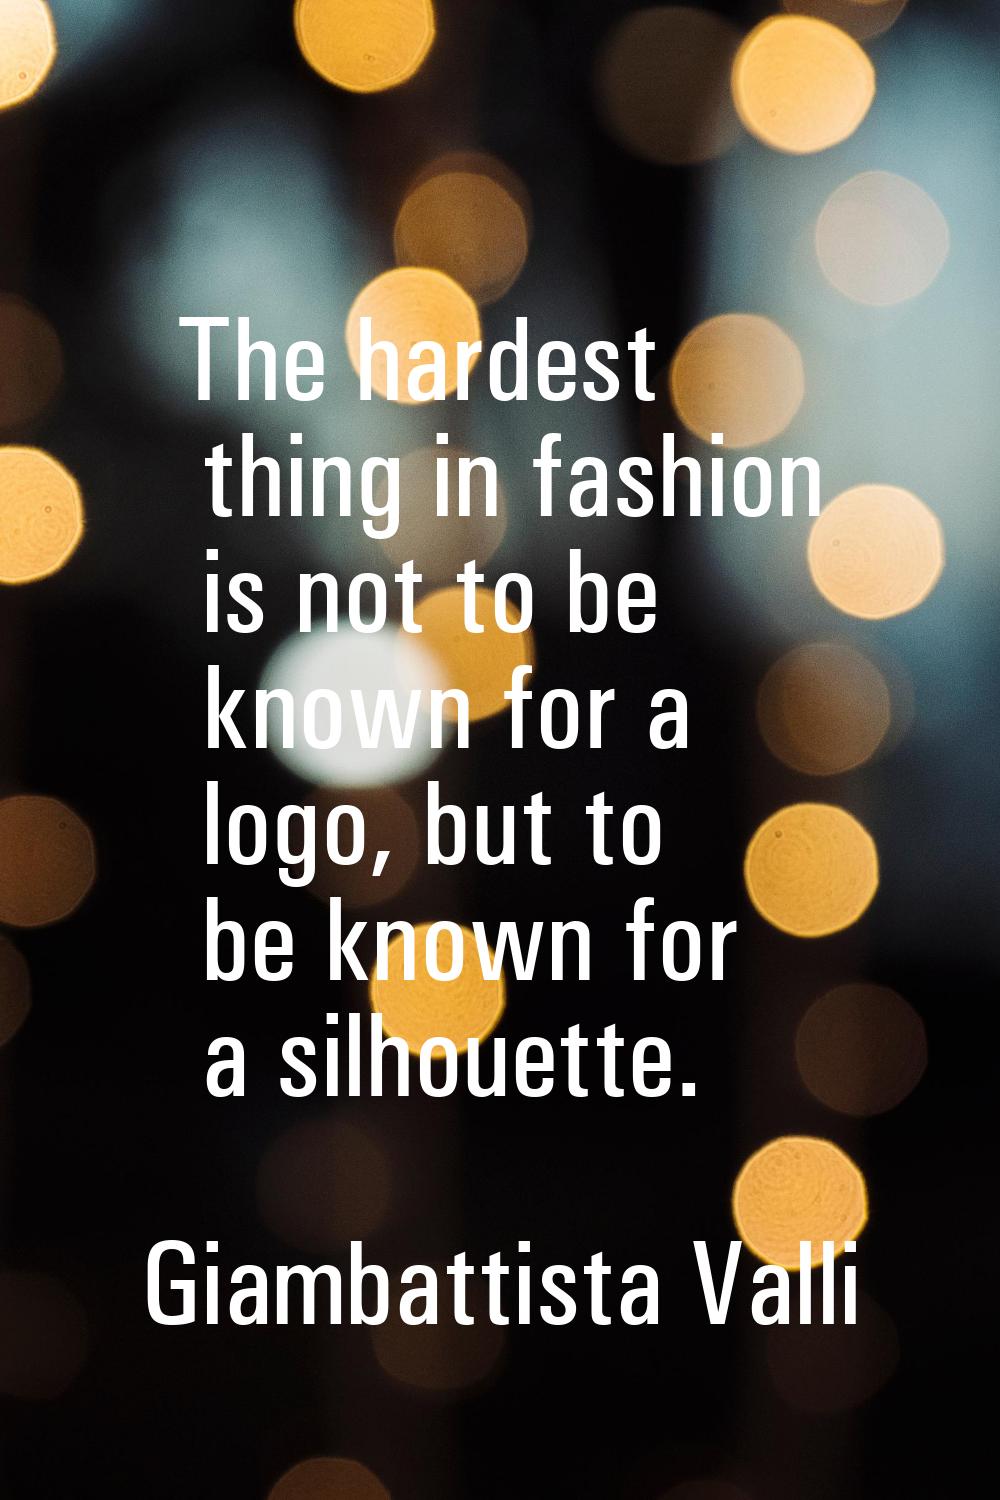 The hardest thing in fashion is not to be known for a logo, but to be known for a silhouette.